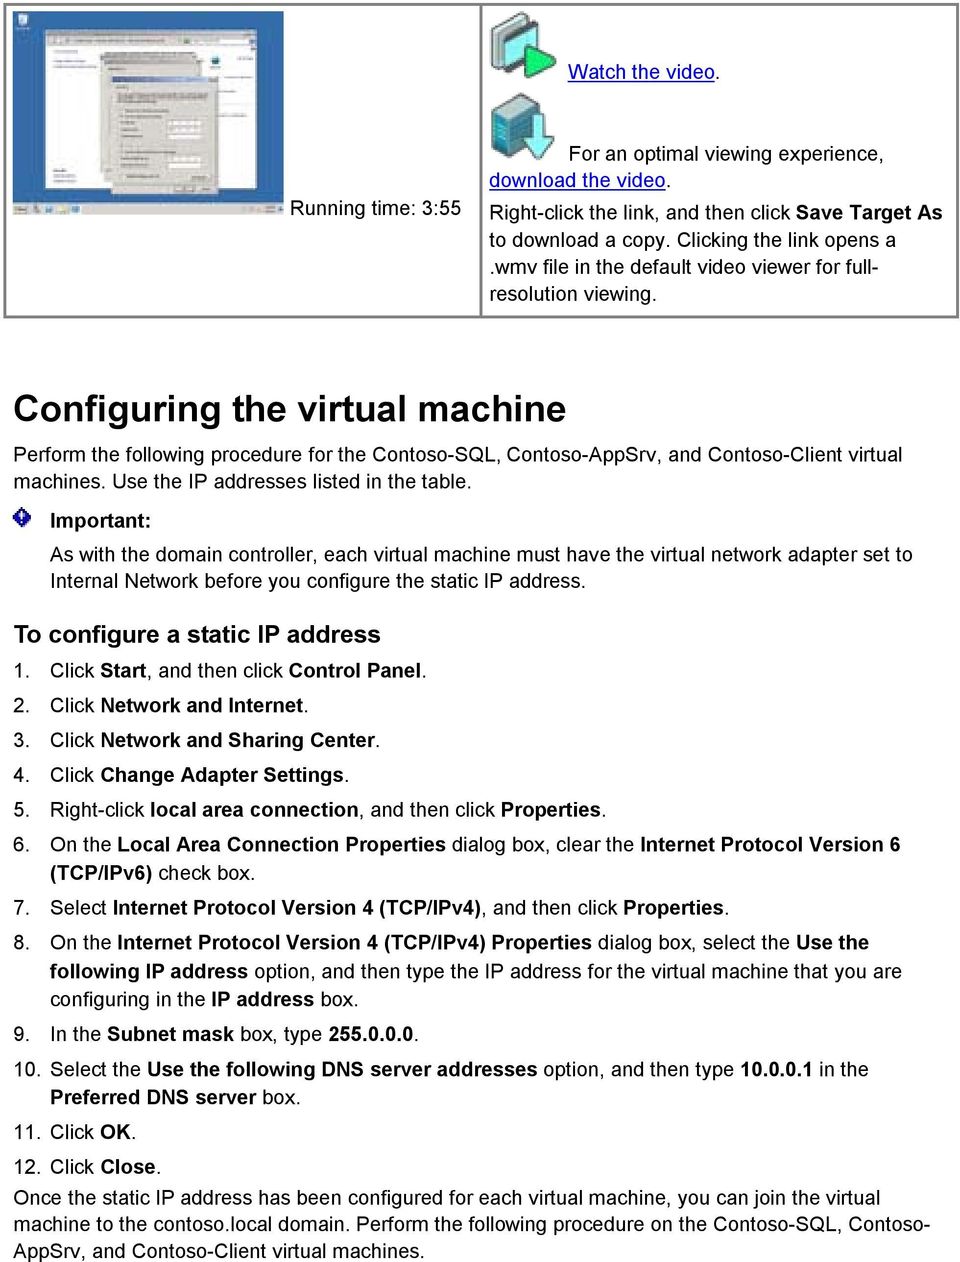 Configuring the virtual machine Perform the following procedure for the Contoso-SQL, Contoso-AppSrv, and Contoso-Client virtual machines. Use the IP addresses listed in the table.